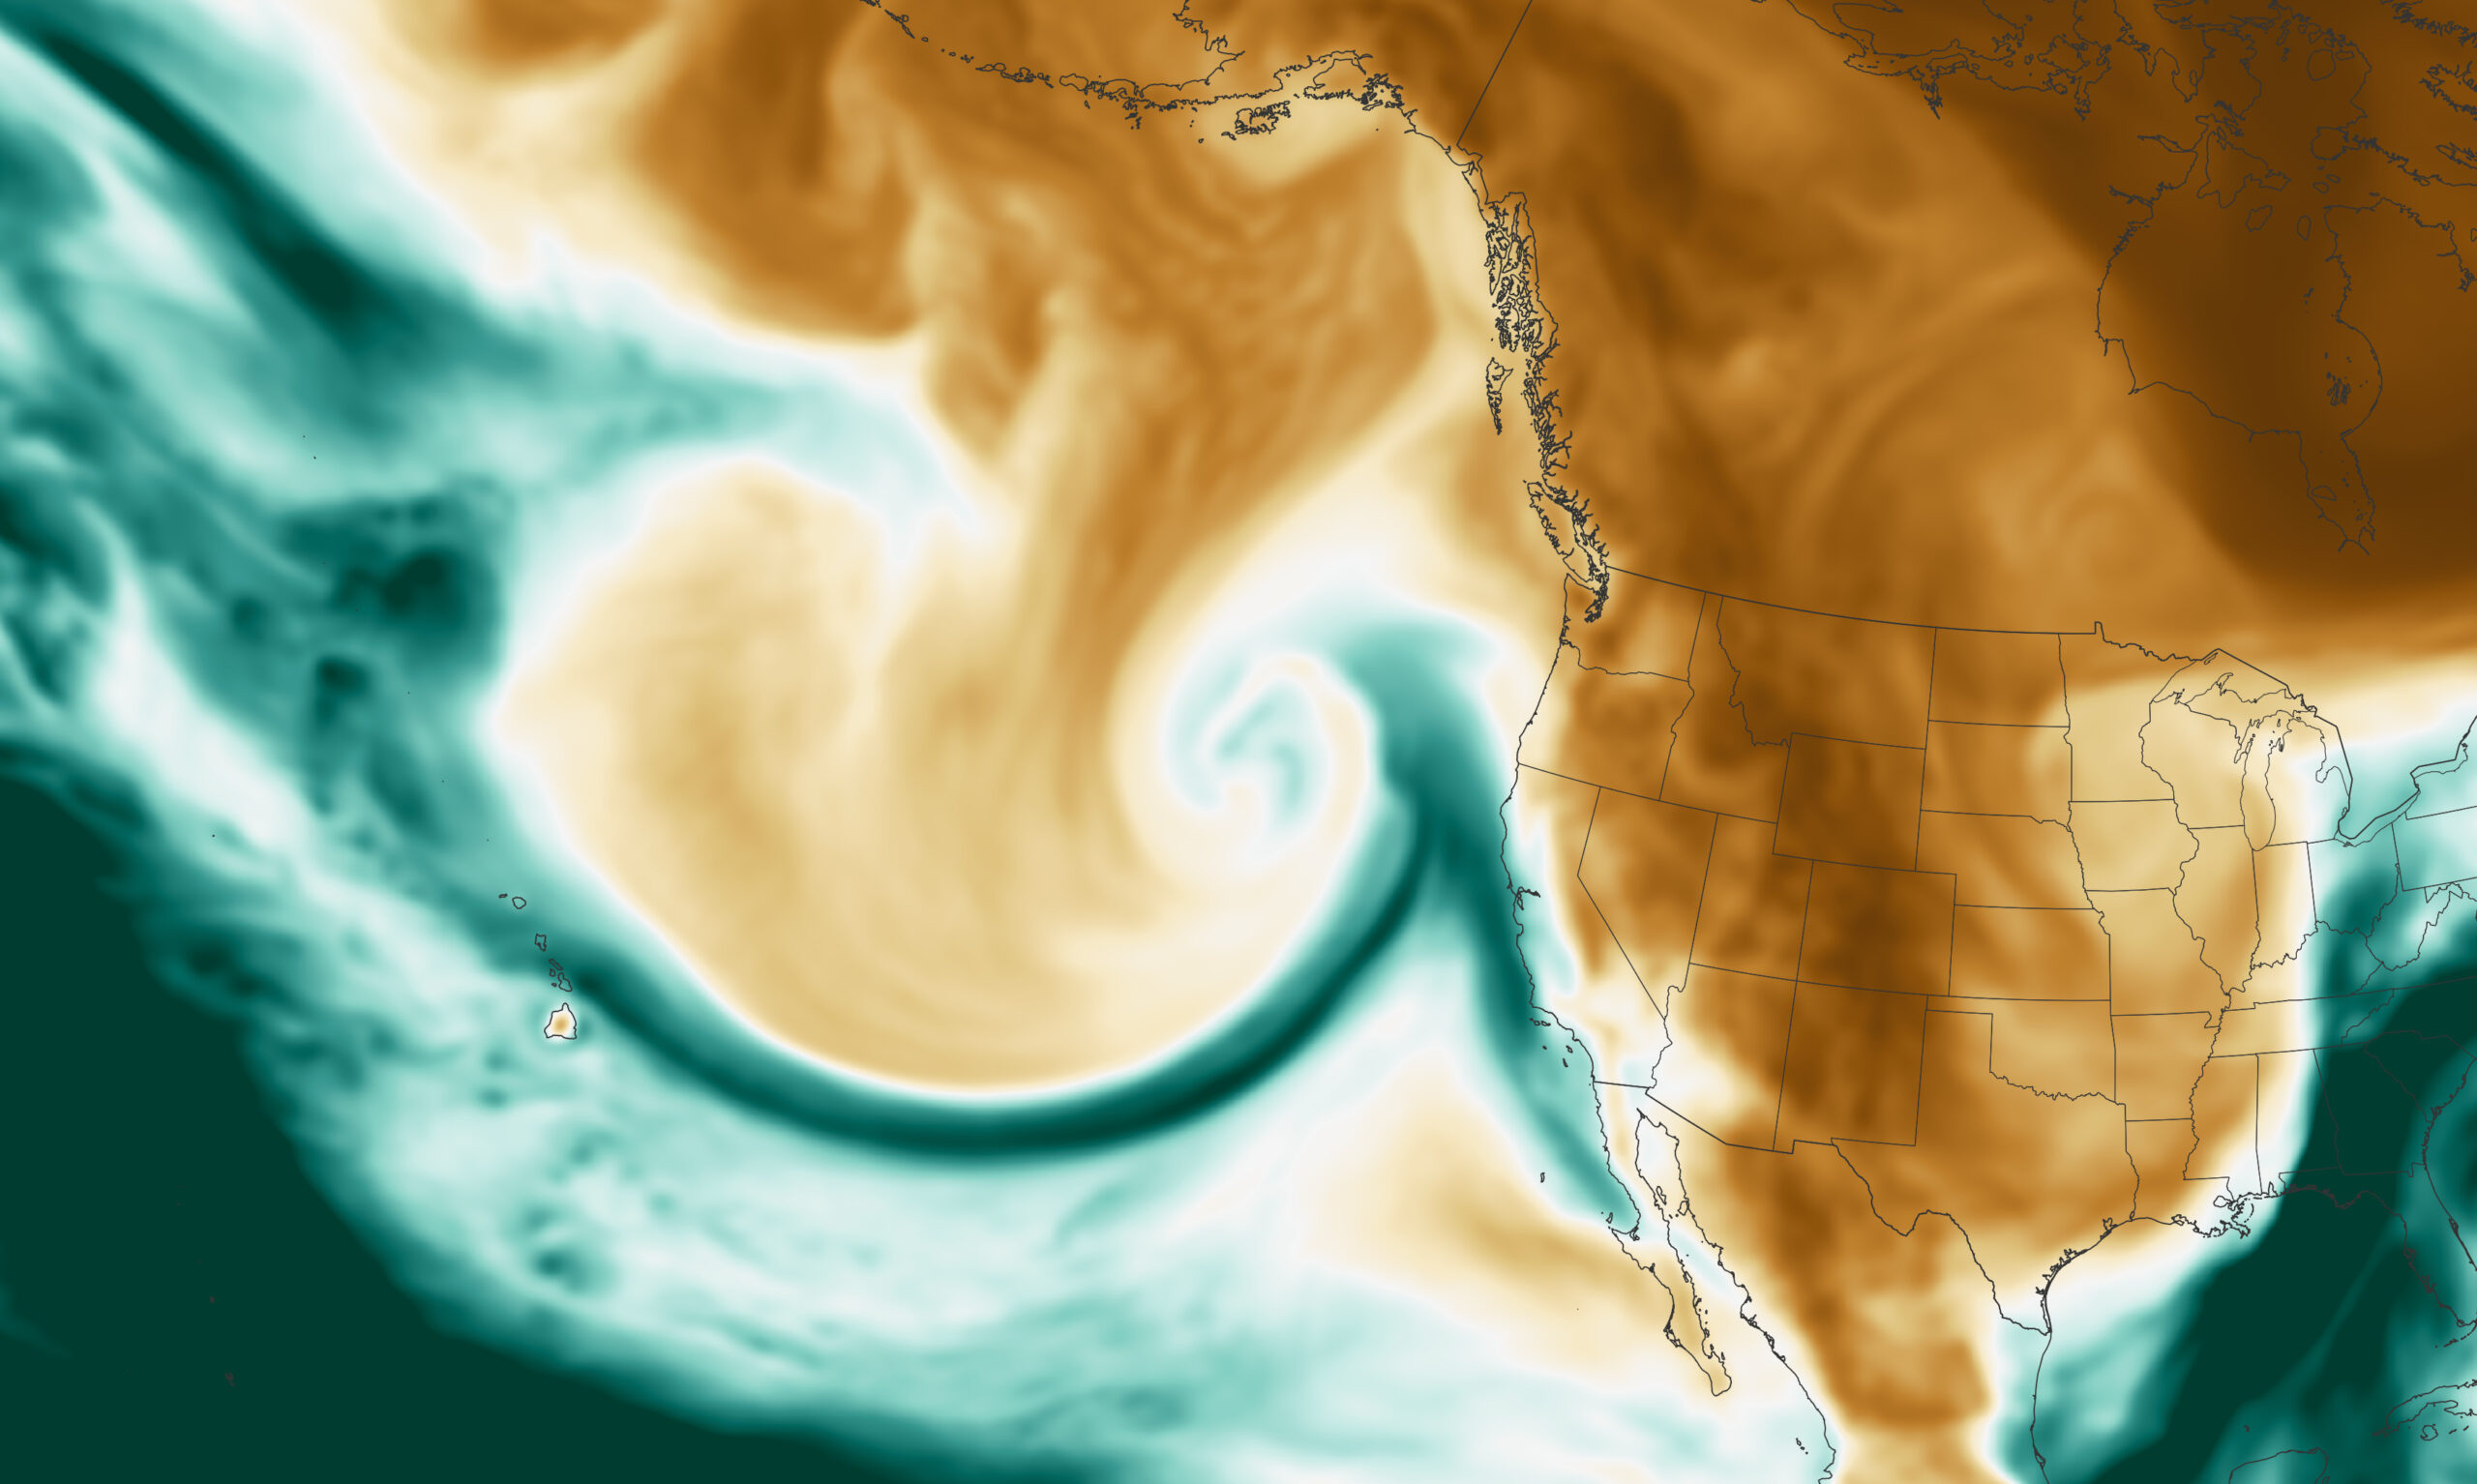 The latest in a series of atmospheric rivers drenching the state was accompanied by hazardous winds and left thousands of people without power (by NASA earth observatory)